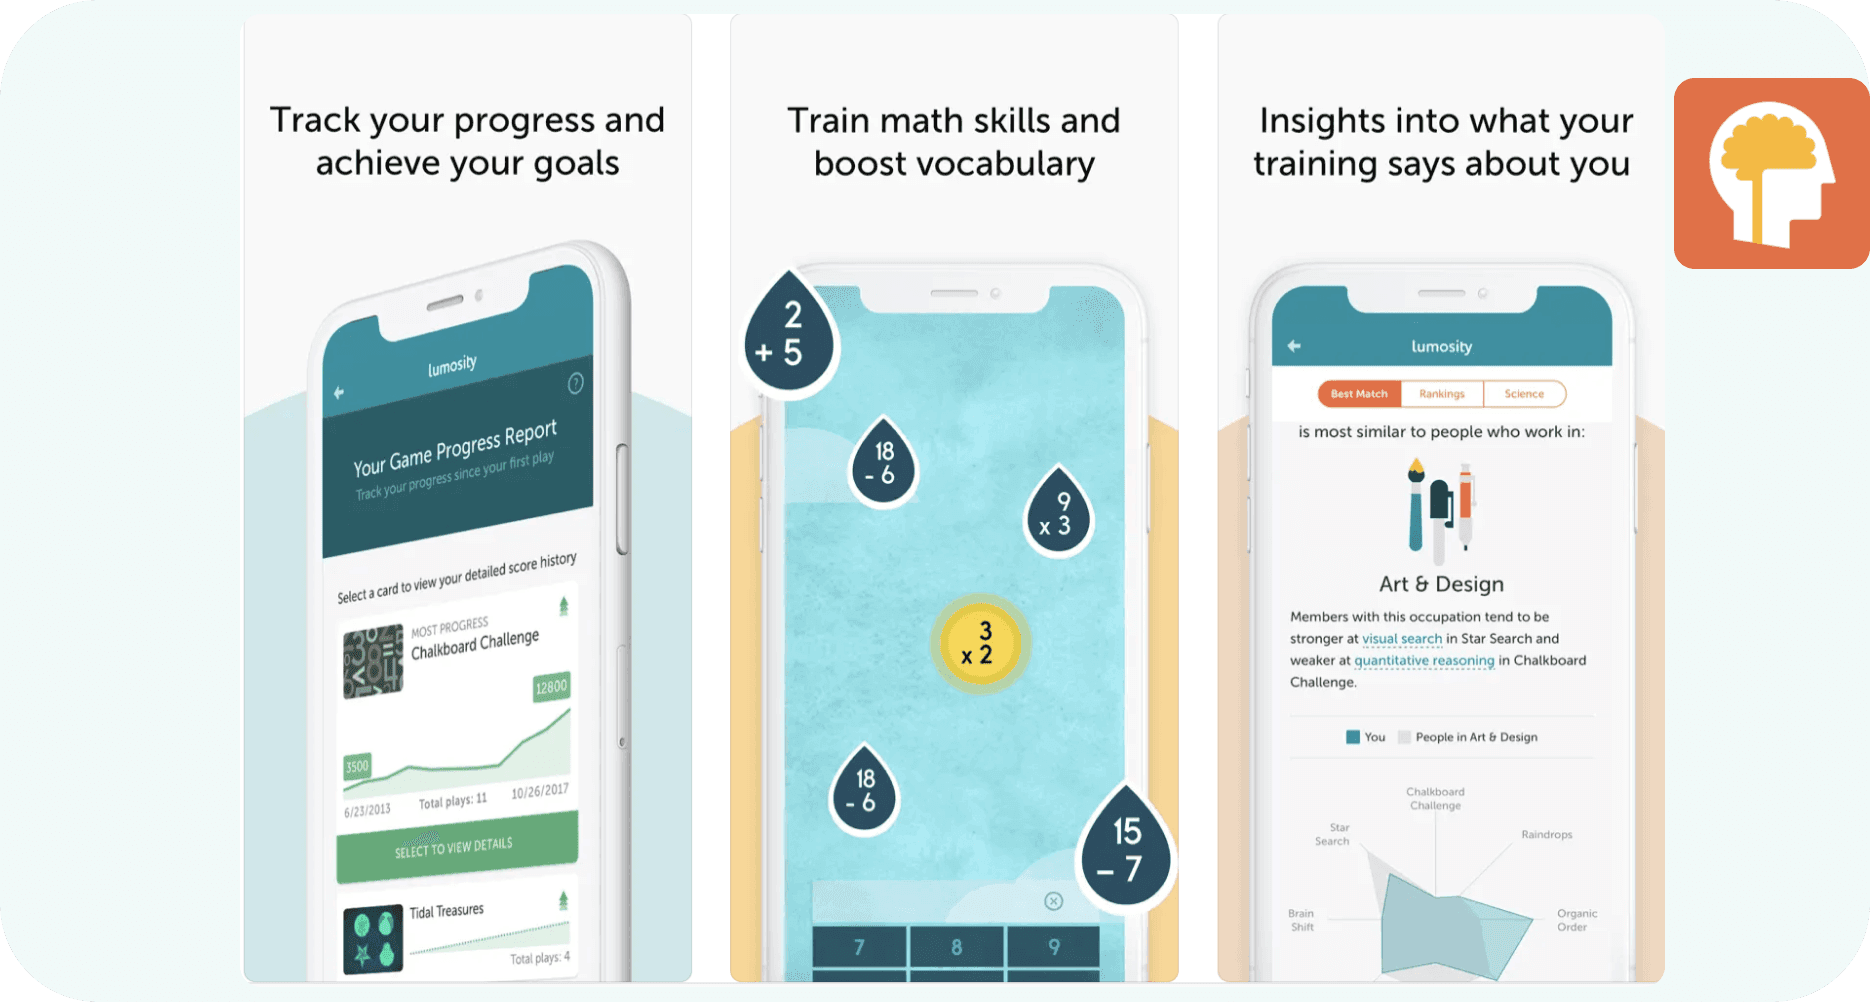 App screenshots from AppStore for Lumosity featuring self improvement features